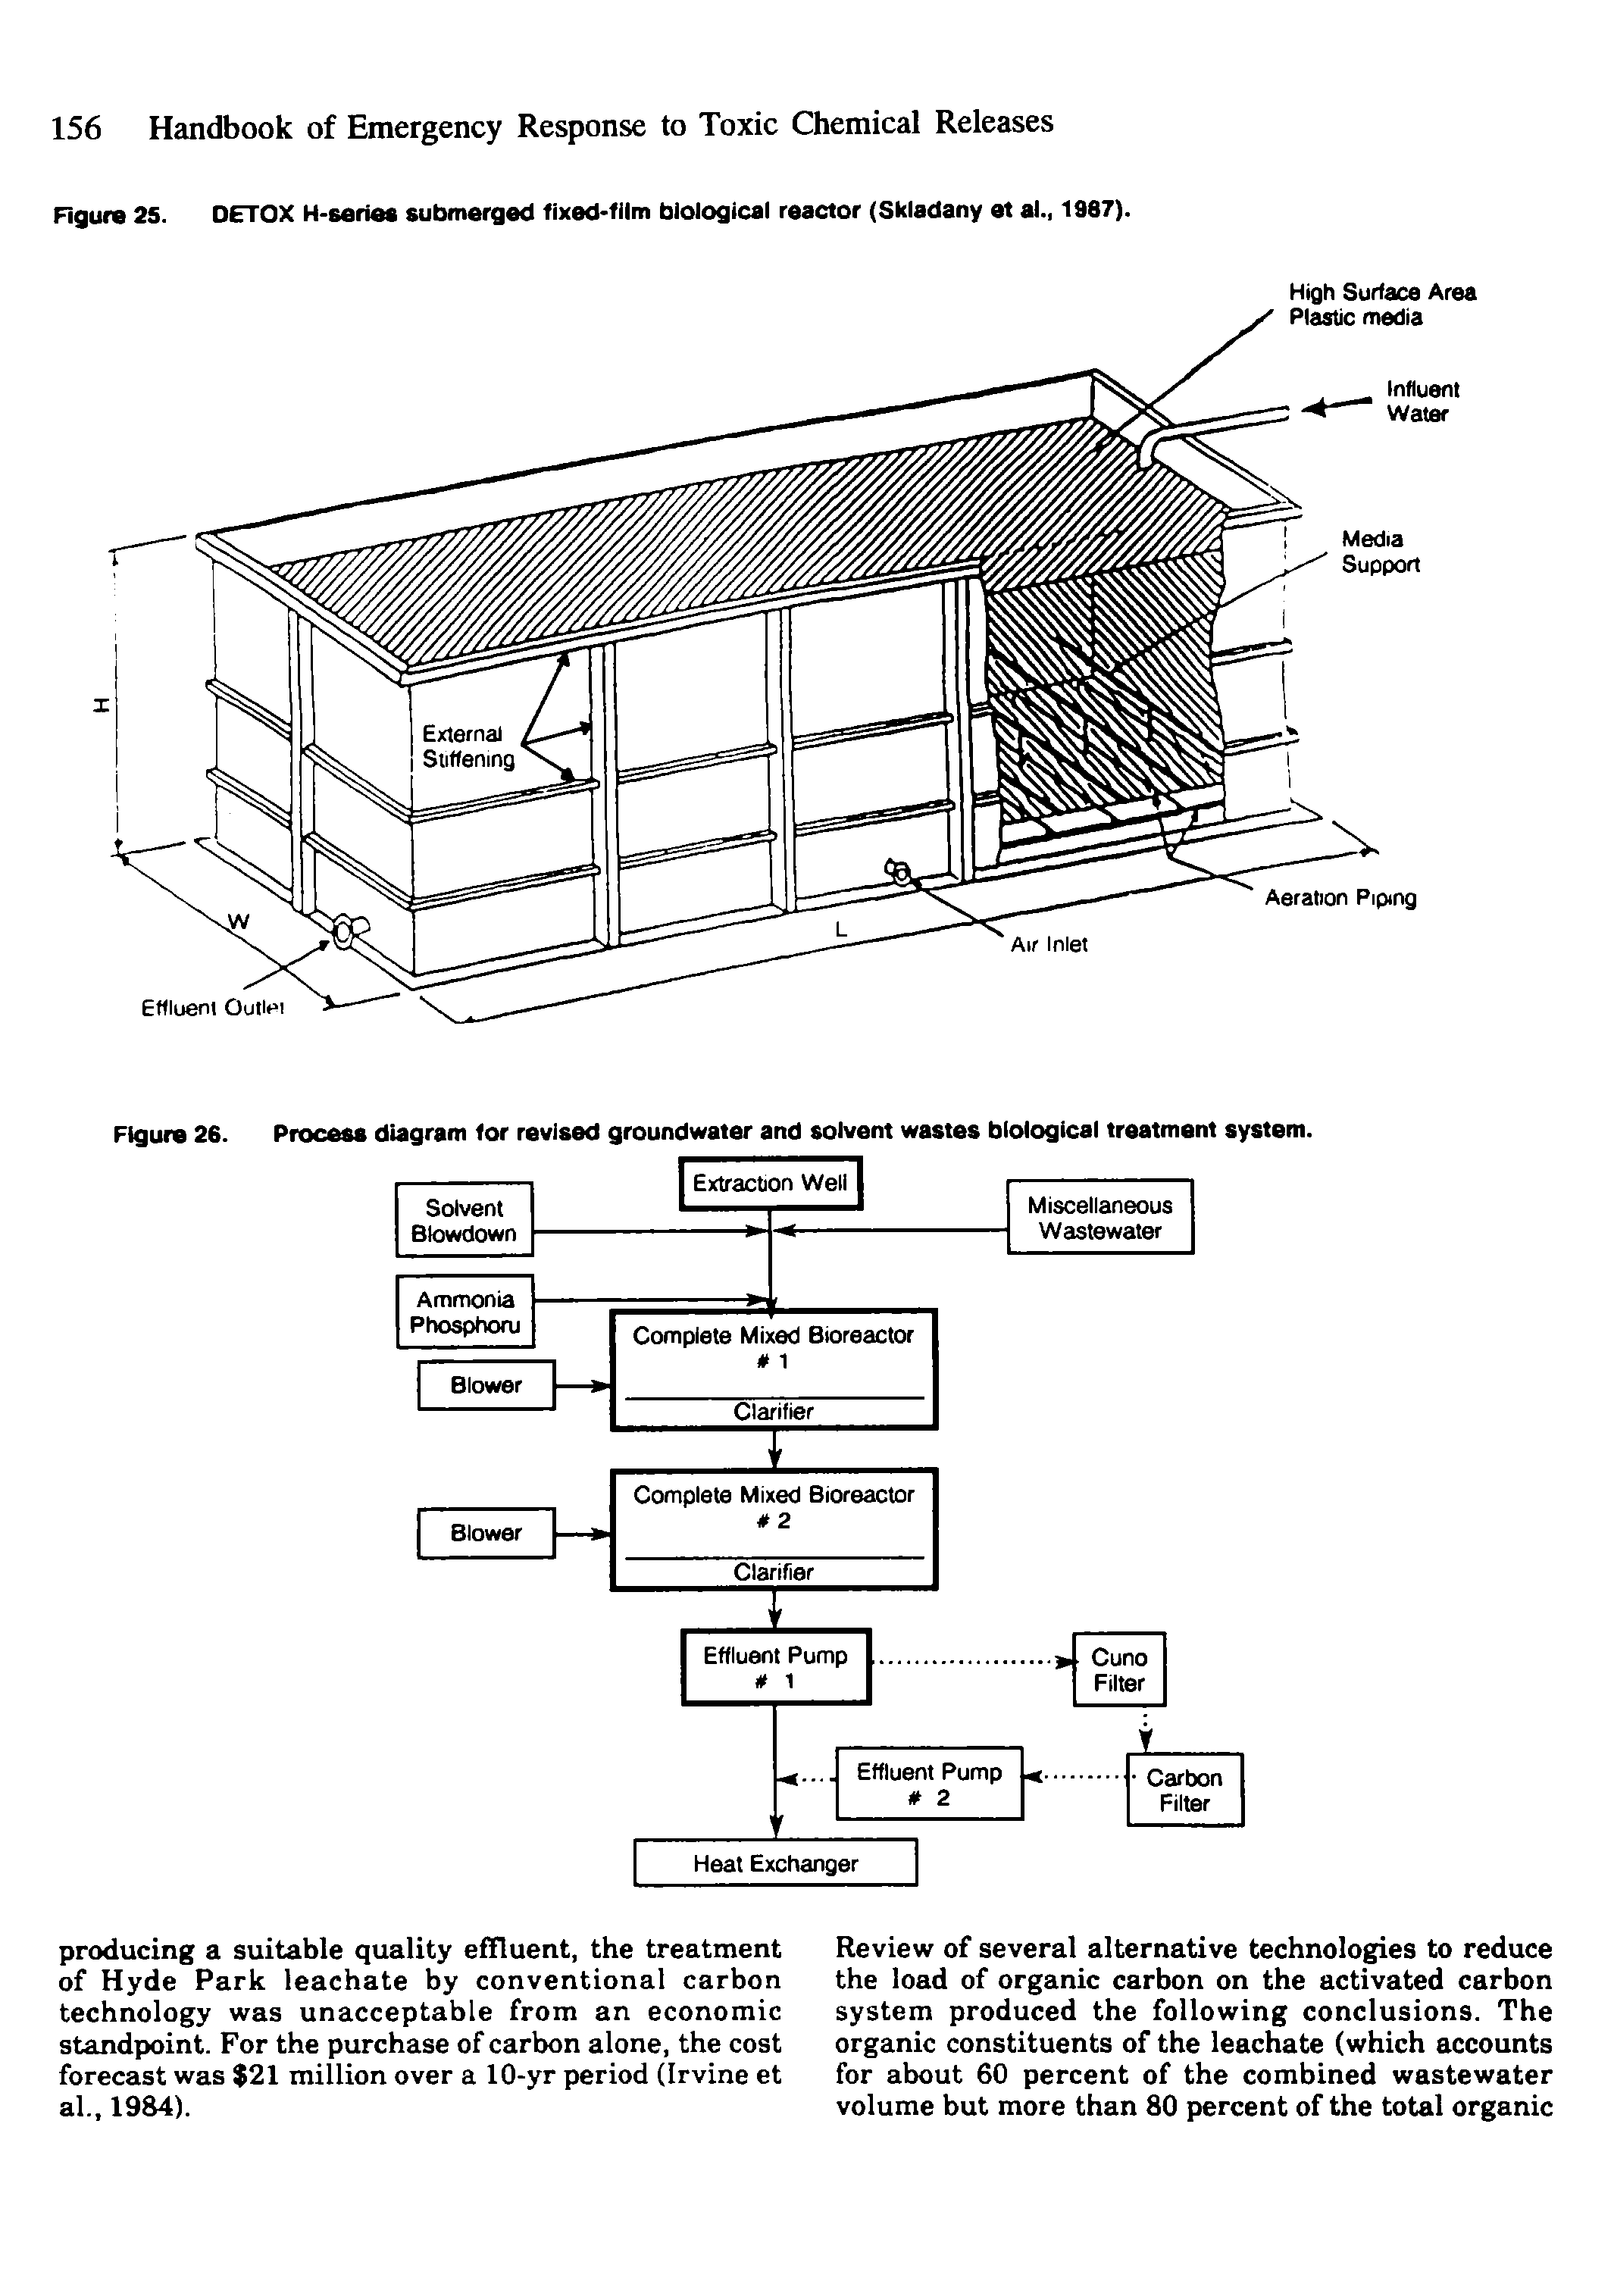 Figure 26. Process diagram for revised groundwater and solvent wastes biological treatment system.